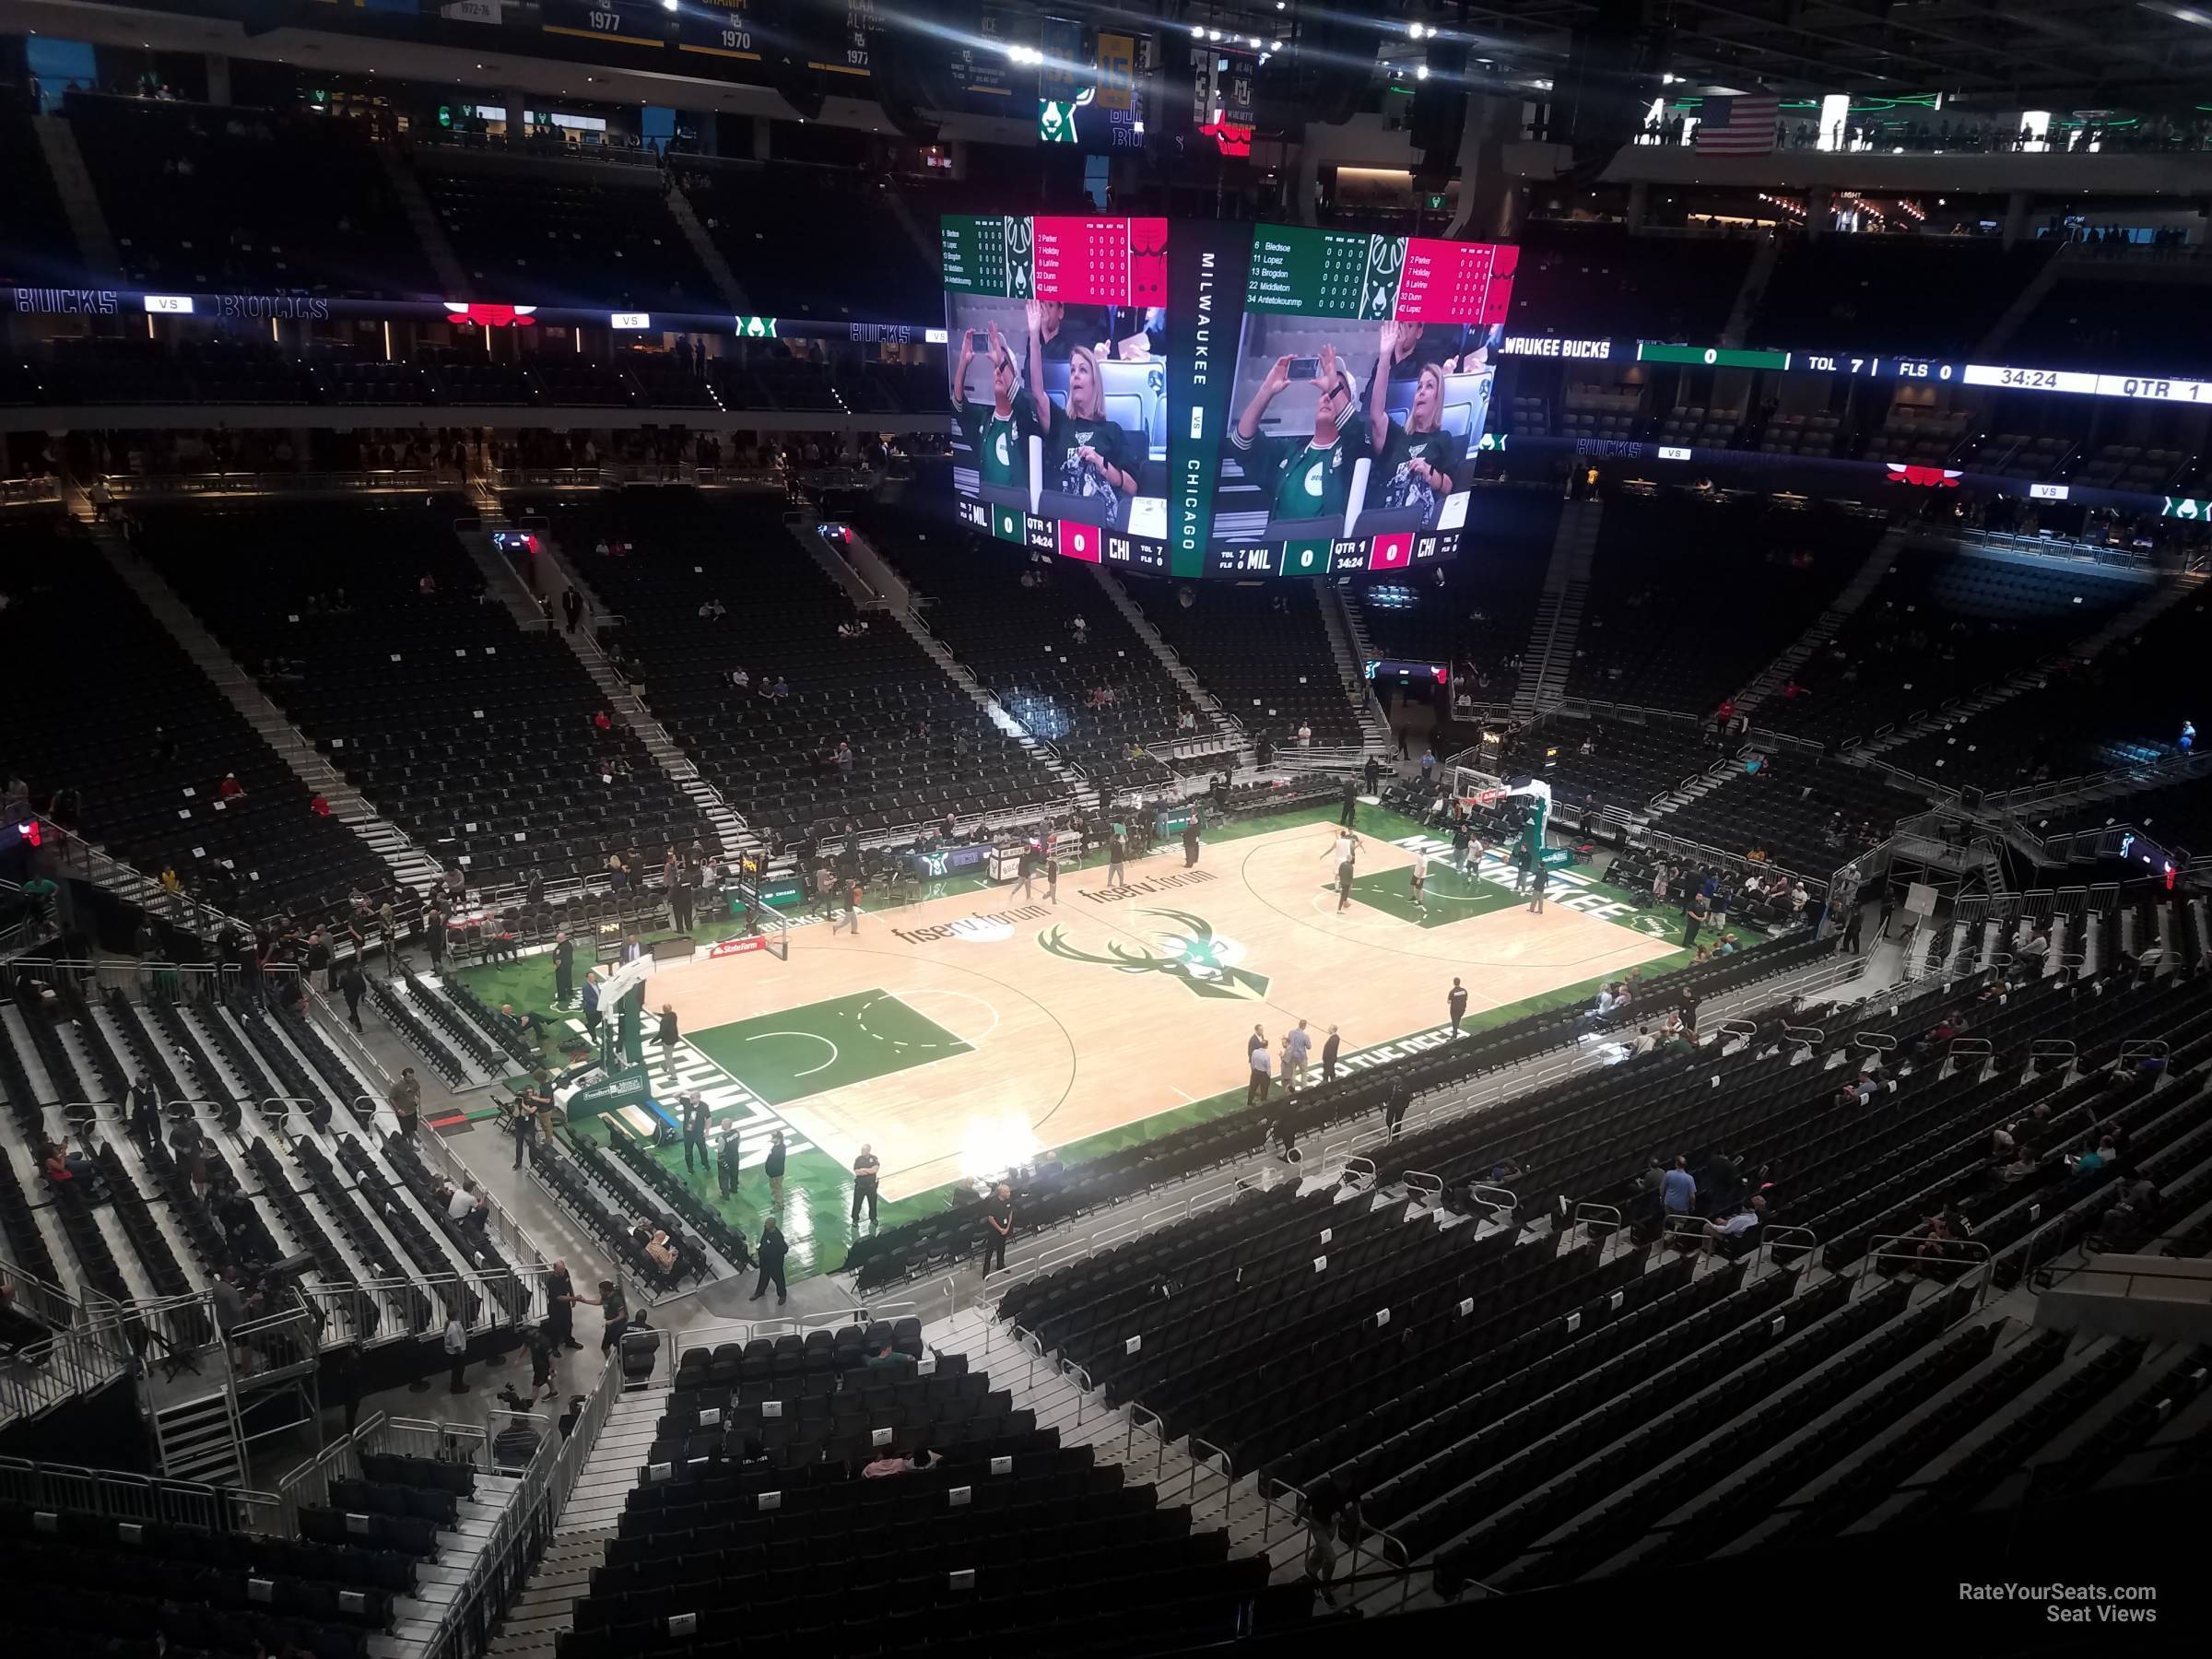 section 211, row 3 seat view  for basketball - fiserv forum